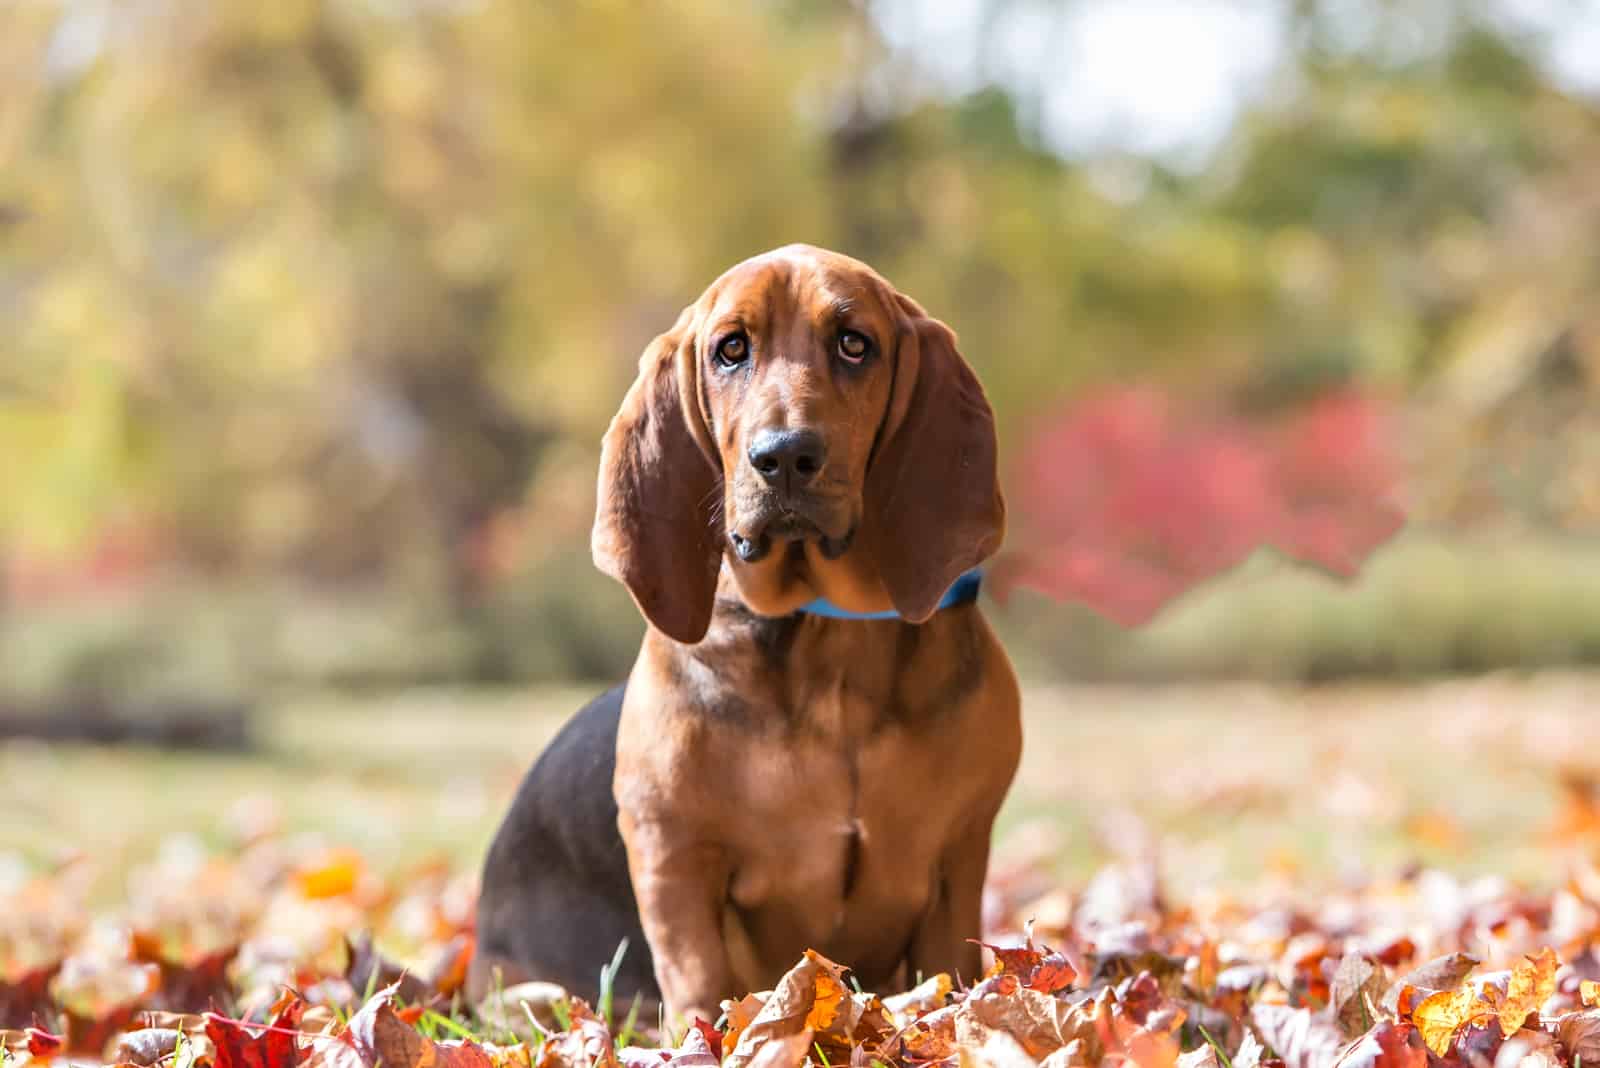 Basset Hound sits in a park on a leaf